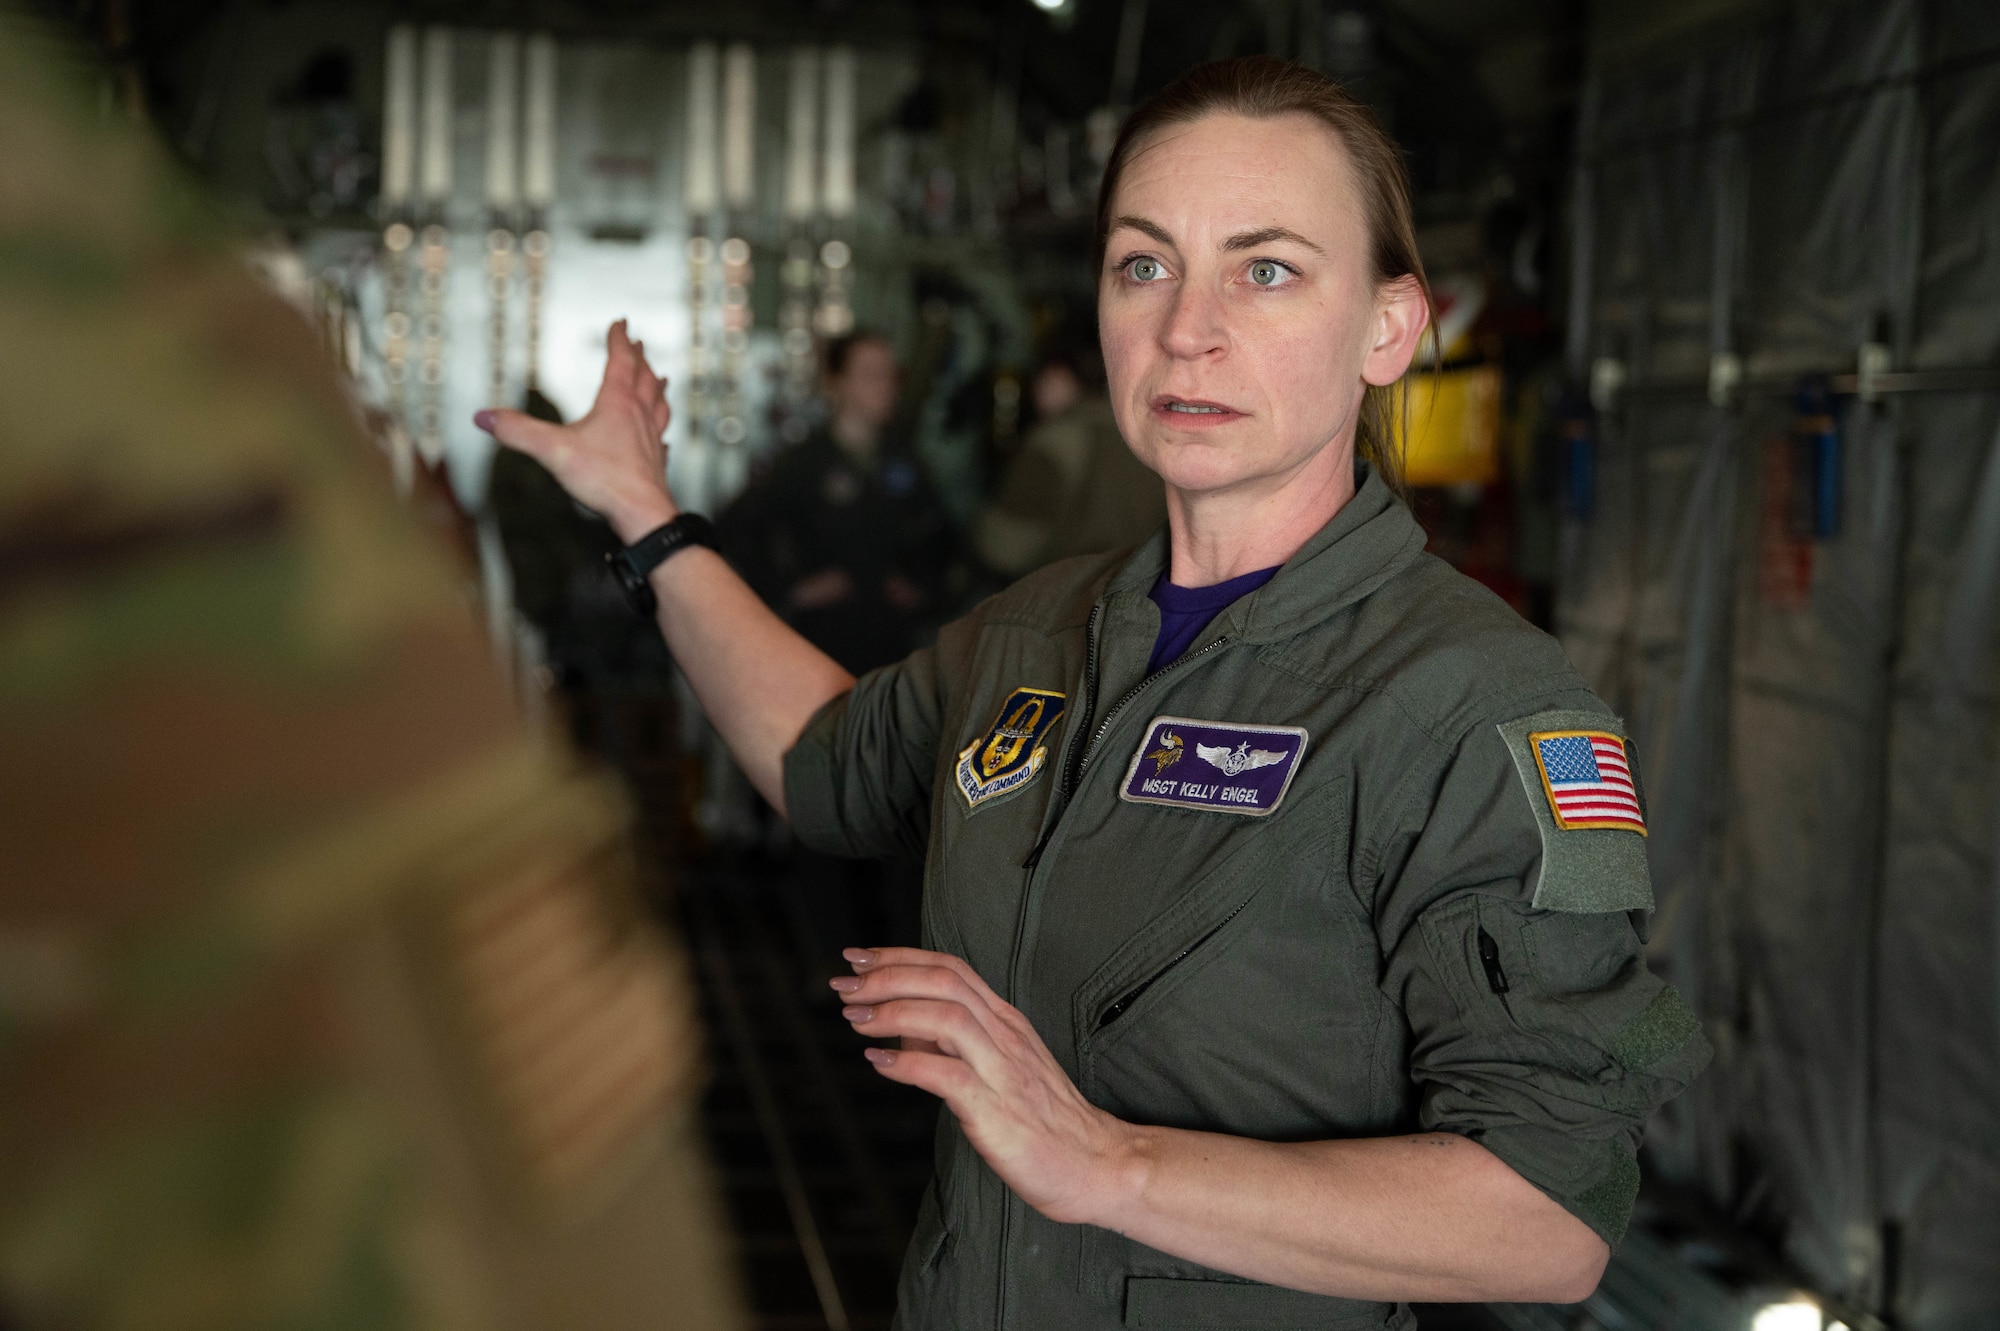 An Airmen works in preparation of C-130 Hercules aeromedical training mission, Feb. 2, 2024. For the first time in wing history the aircraft was piloted and operated by a team of all-female pilots and aircrew.